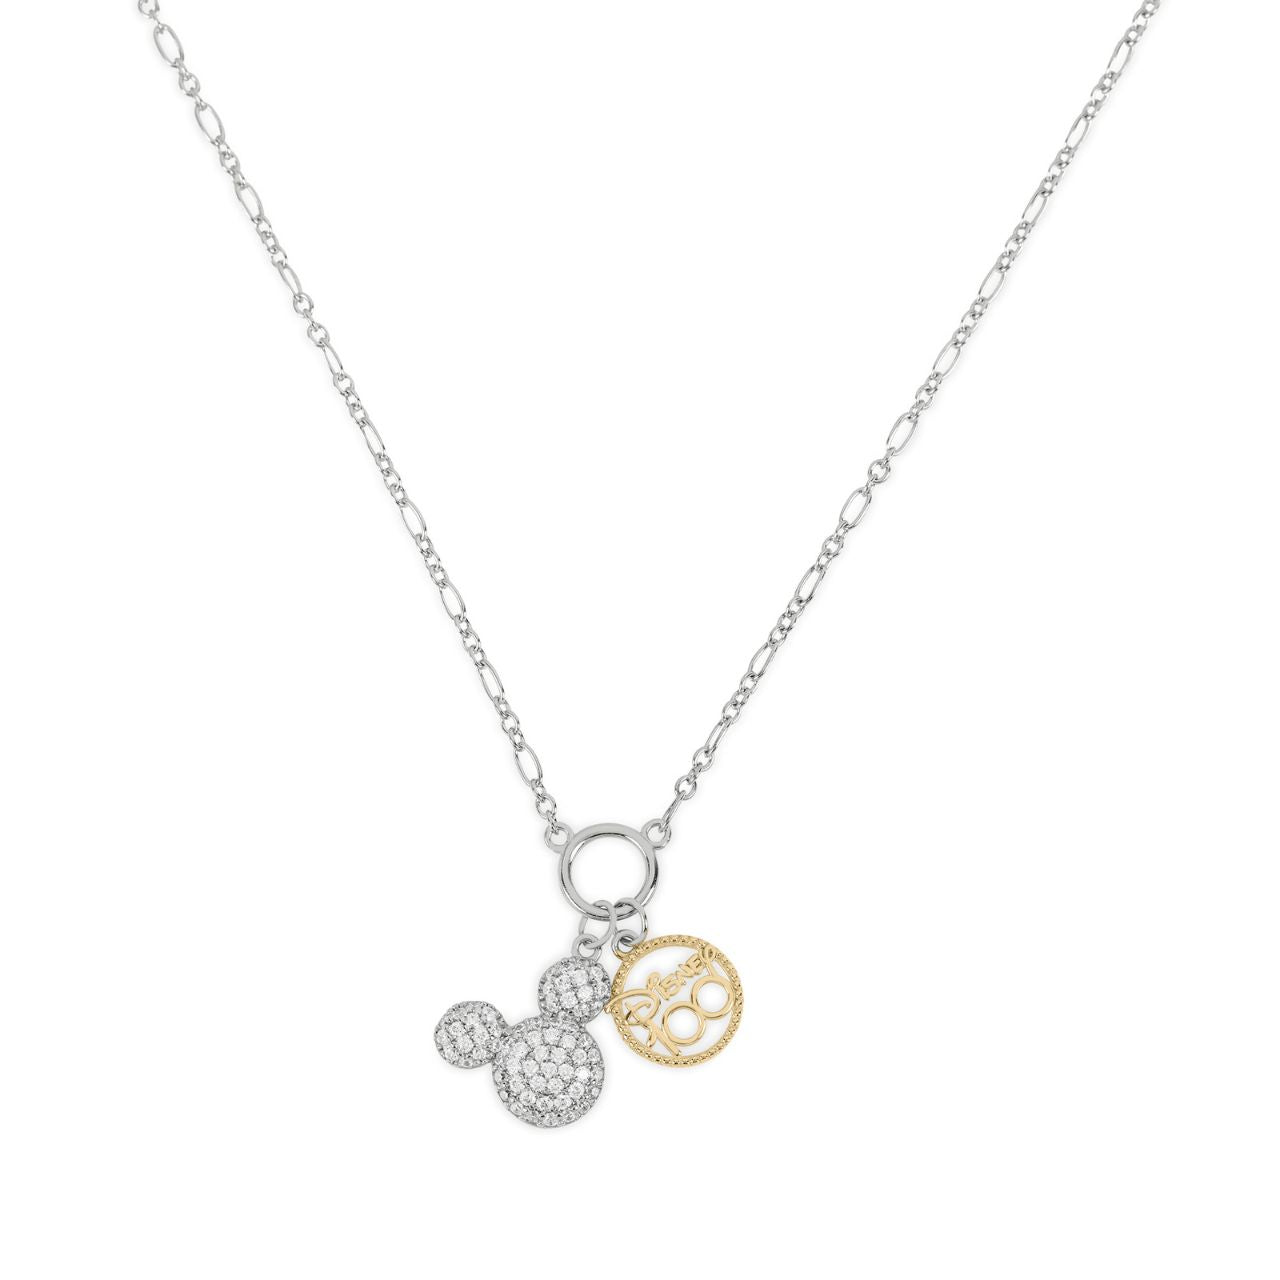 Disney 100th Anniversary Mickey Mouse Necklace  Celebrate 100 years of Disney magic with this limited edition Mickey Mouse necklace! Crafted with high-quality materials, this necklace showcases the beloved character in stunning detail. Perfect for any Disney fan, this necklace is a must-have for any collection. Bring a touch of magic to your style with the Disney 100th Anniversary Mickey Mouse Necklace.